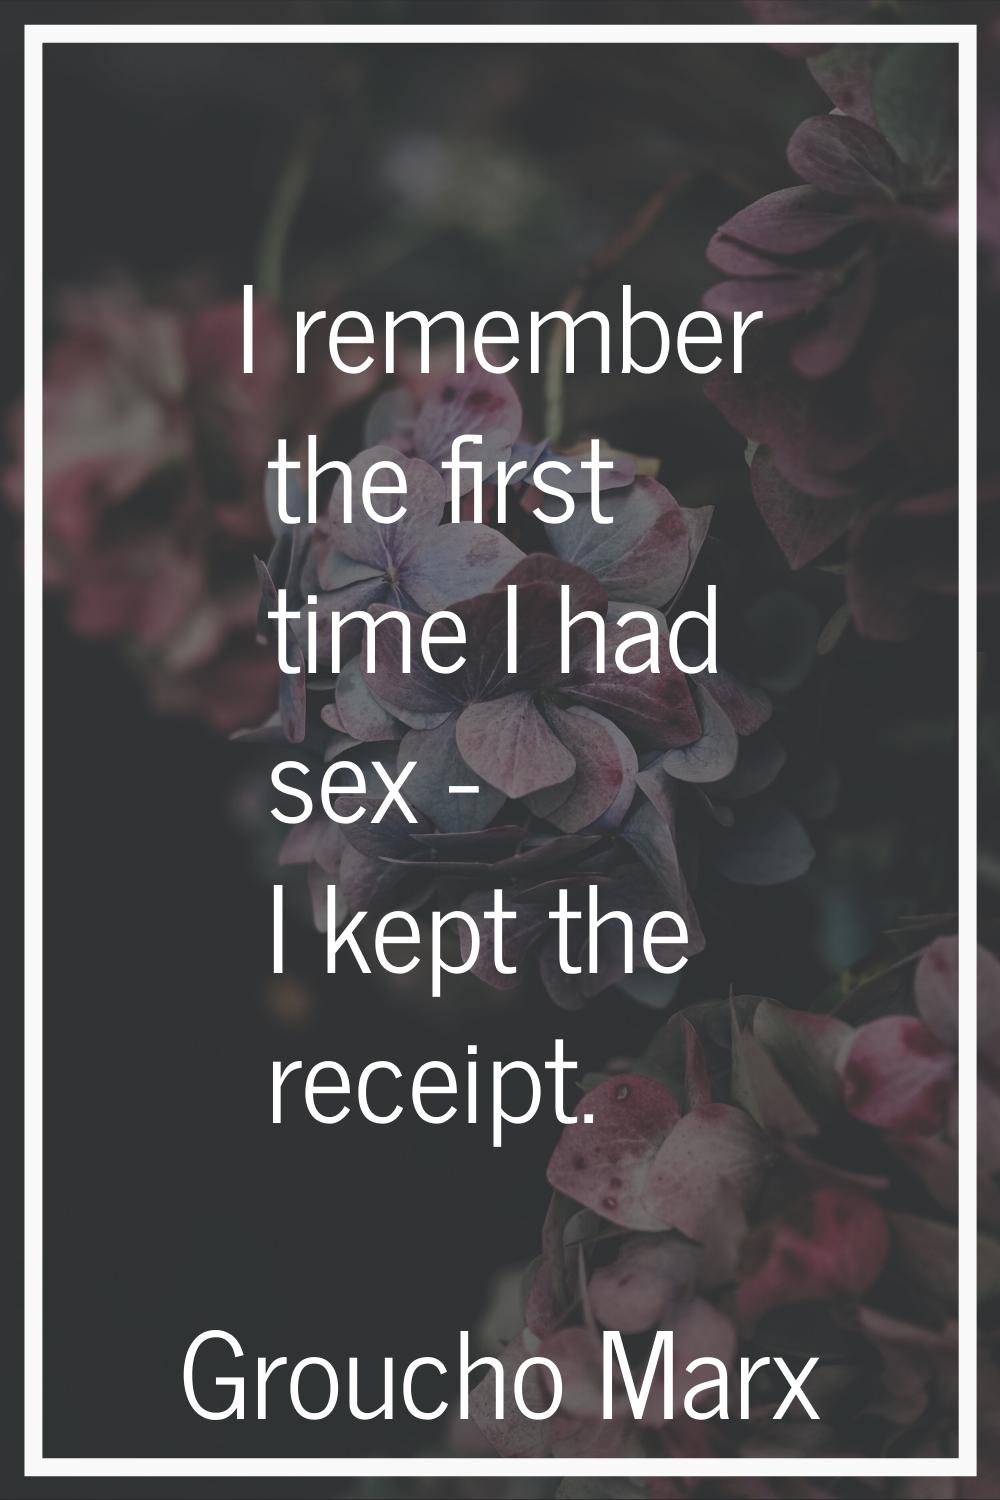 I remember the first time I had sex - I kept the receipt.